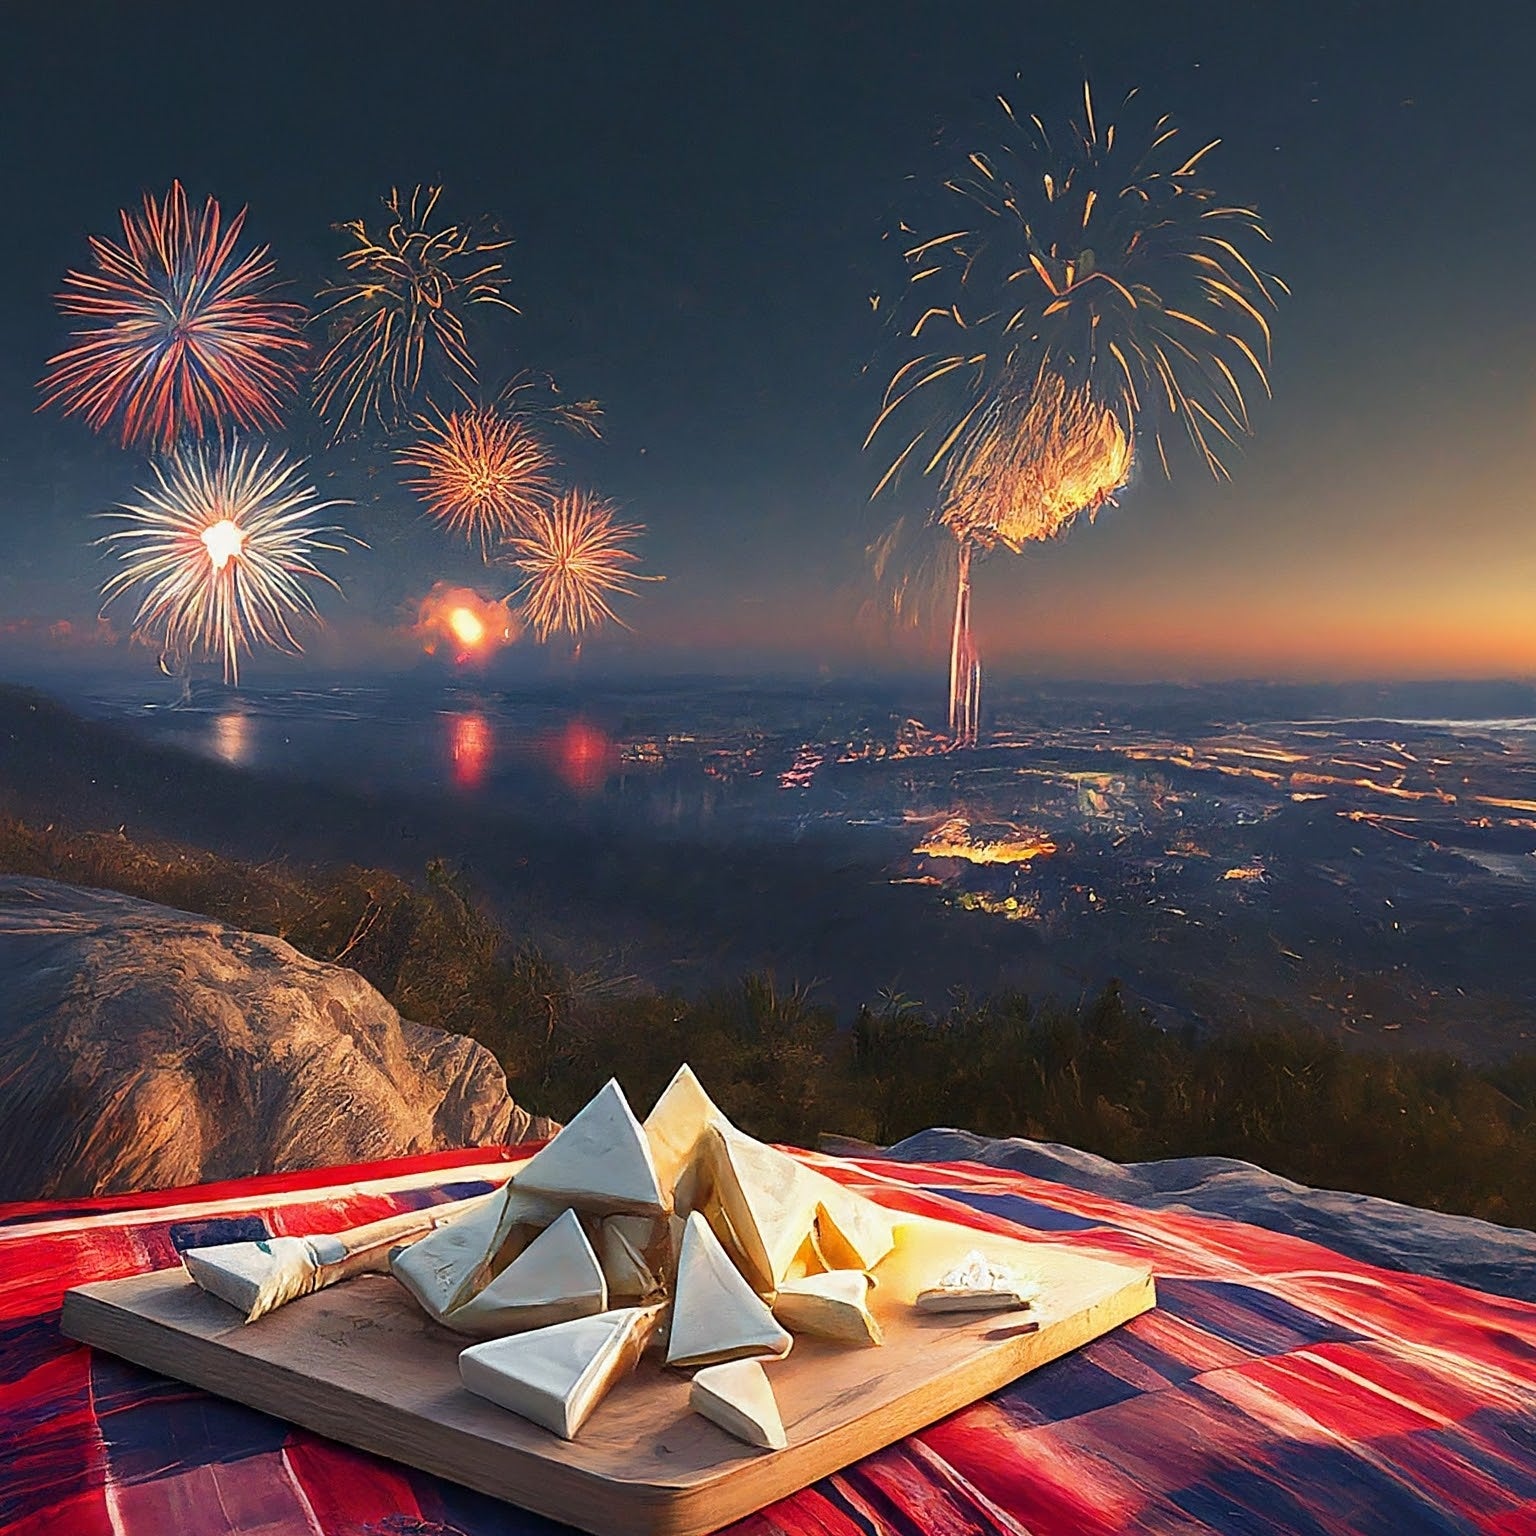 Freeze Dried Ice Cream is the Best Treat for the Firework Show!